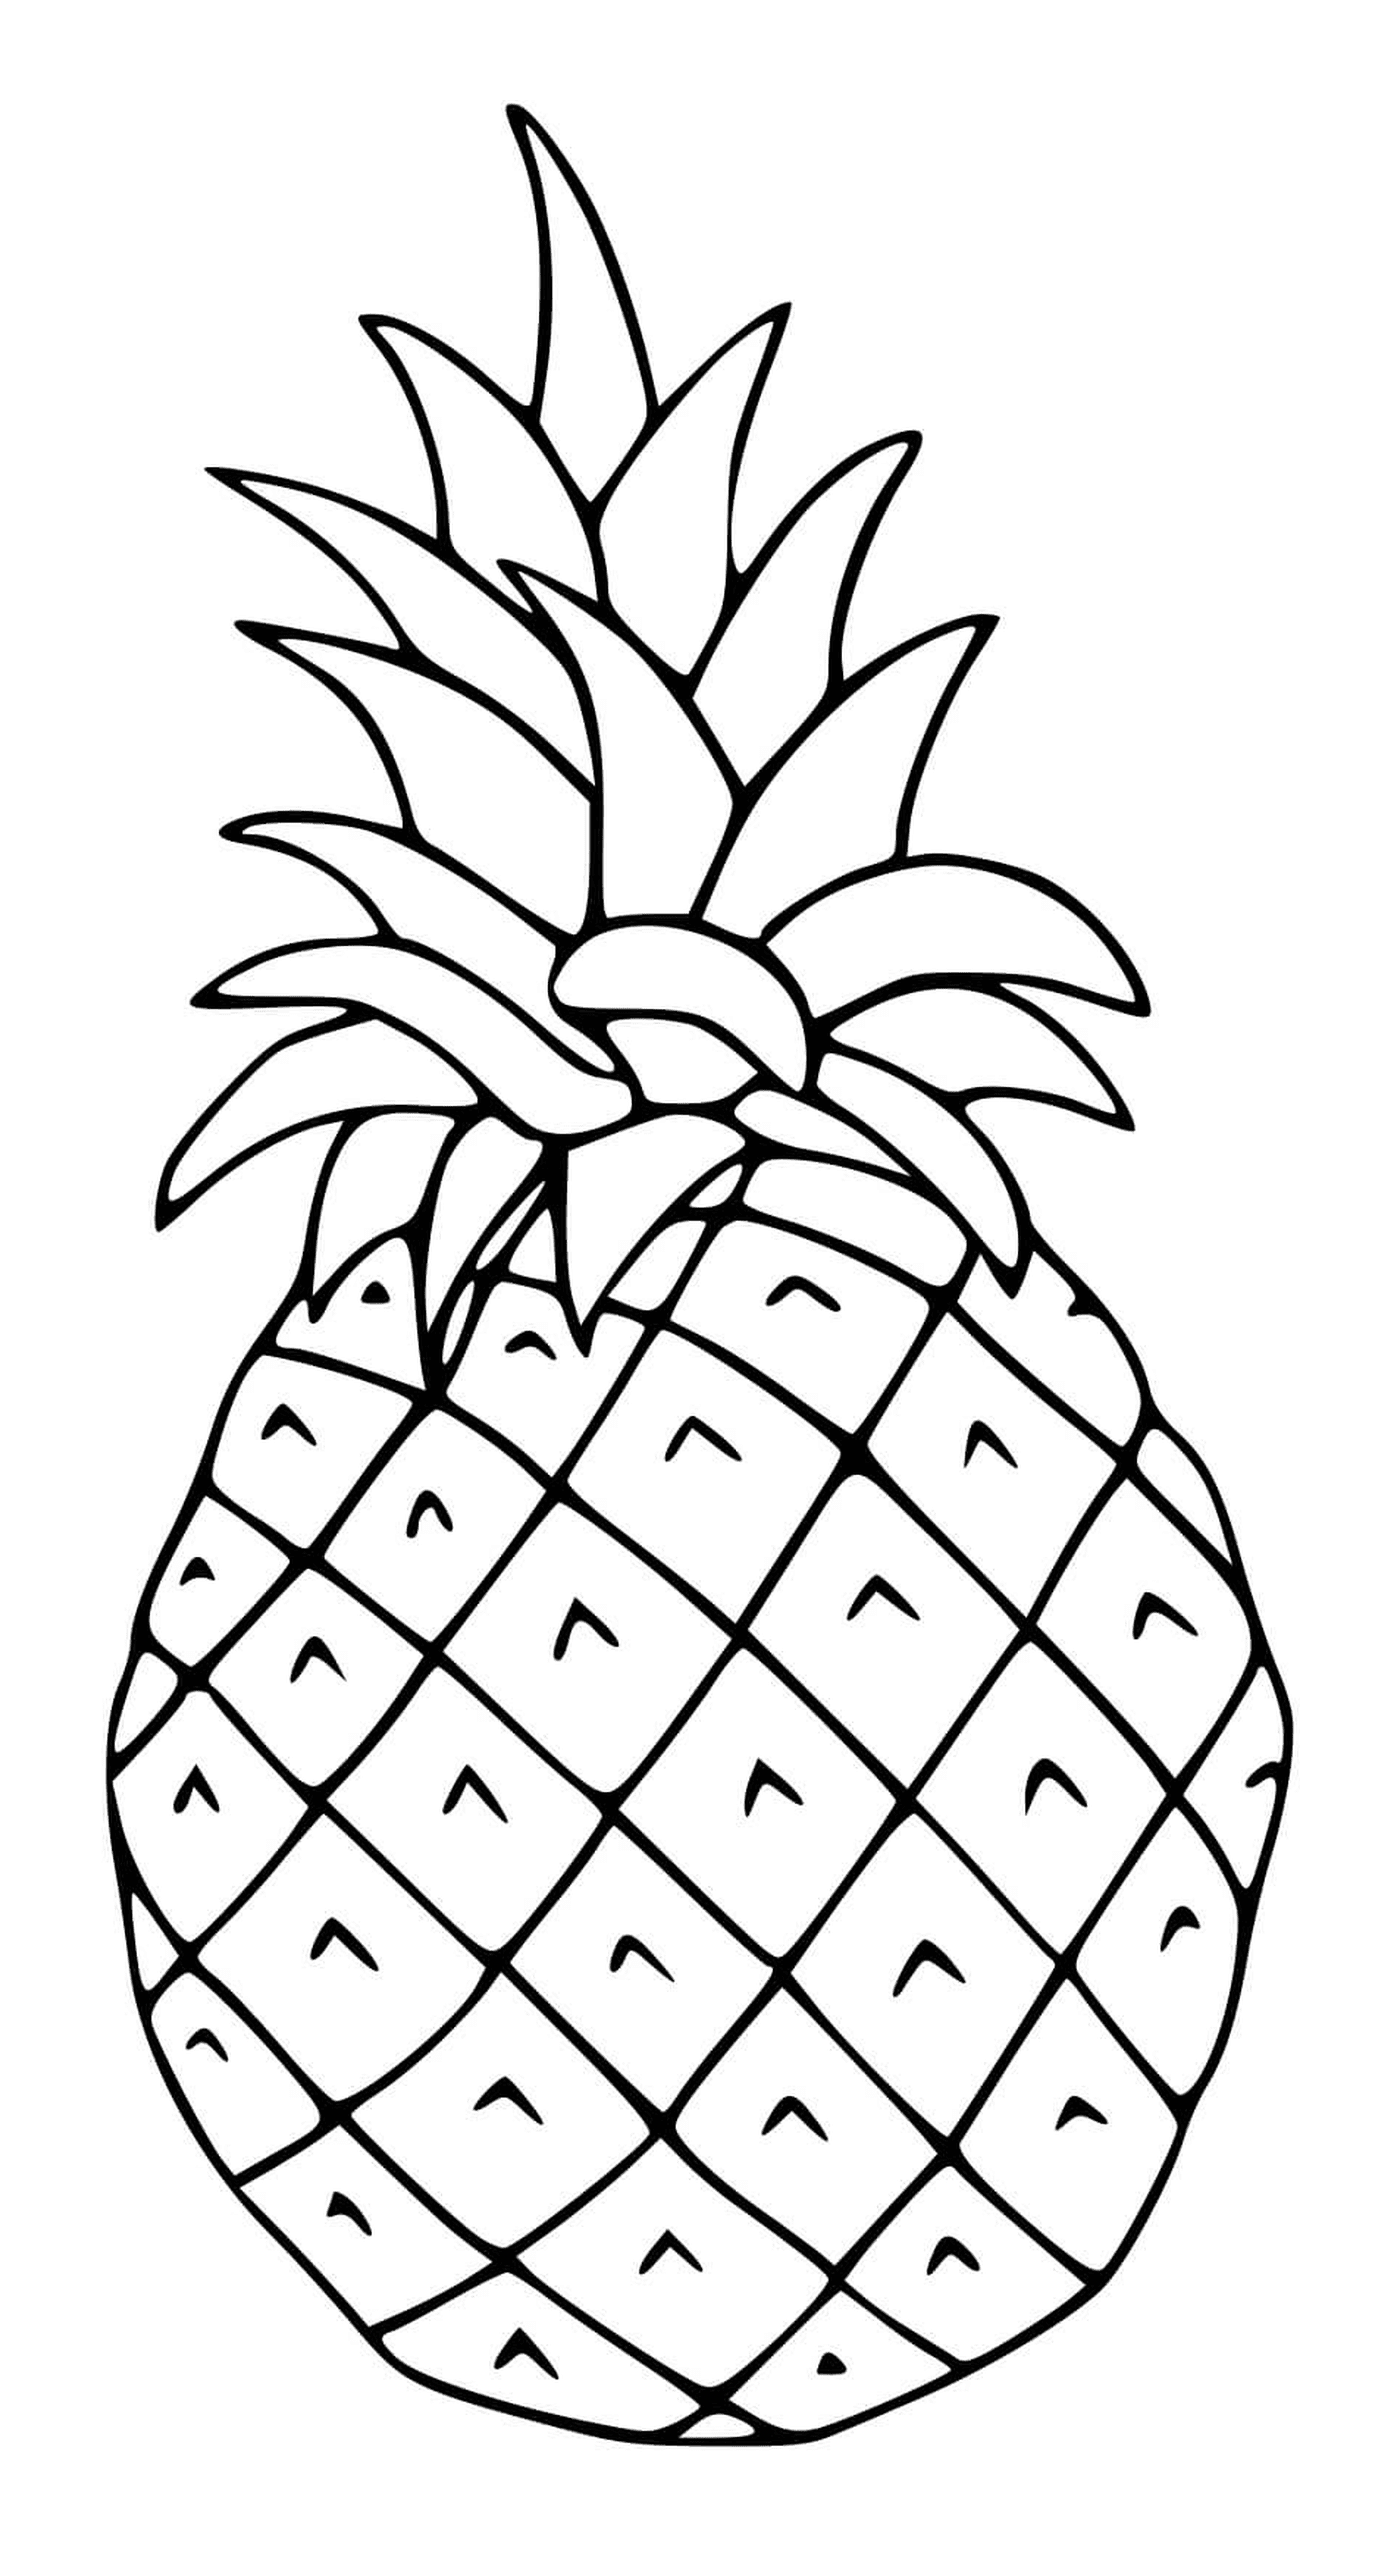  A colourful fruit pineapple 